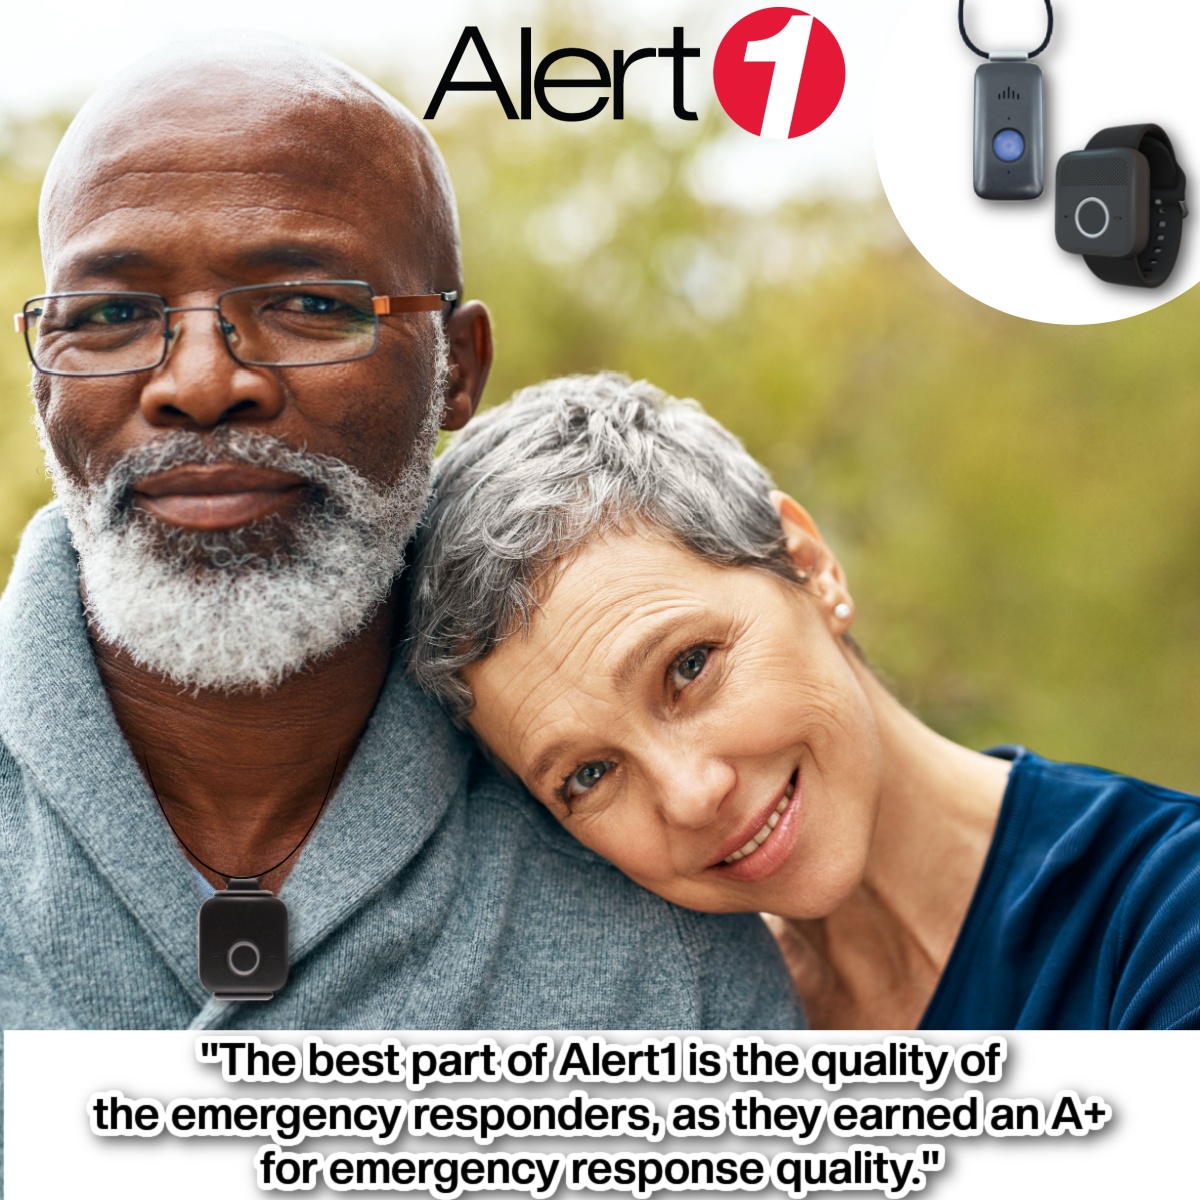 Get the 24/7 emergency monitoring service rated A+ in reviews! Lowest prices for life-saving service, #free equipment use, invaluable peace of mind. Call Alert1 now at 888-981-9844 or visit Alert-1.com.

#aginginplace #SeniorSafety #peaceofmind